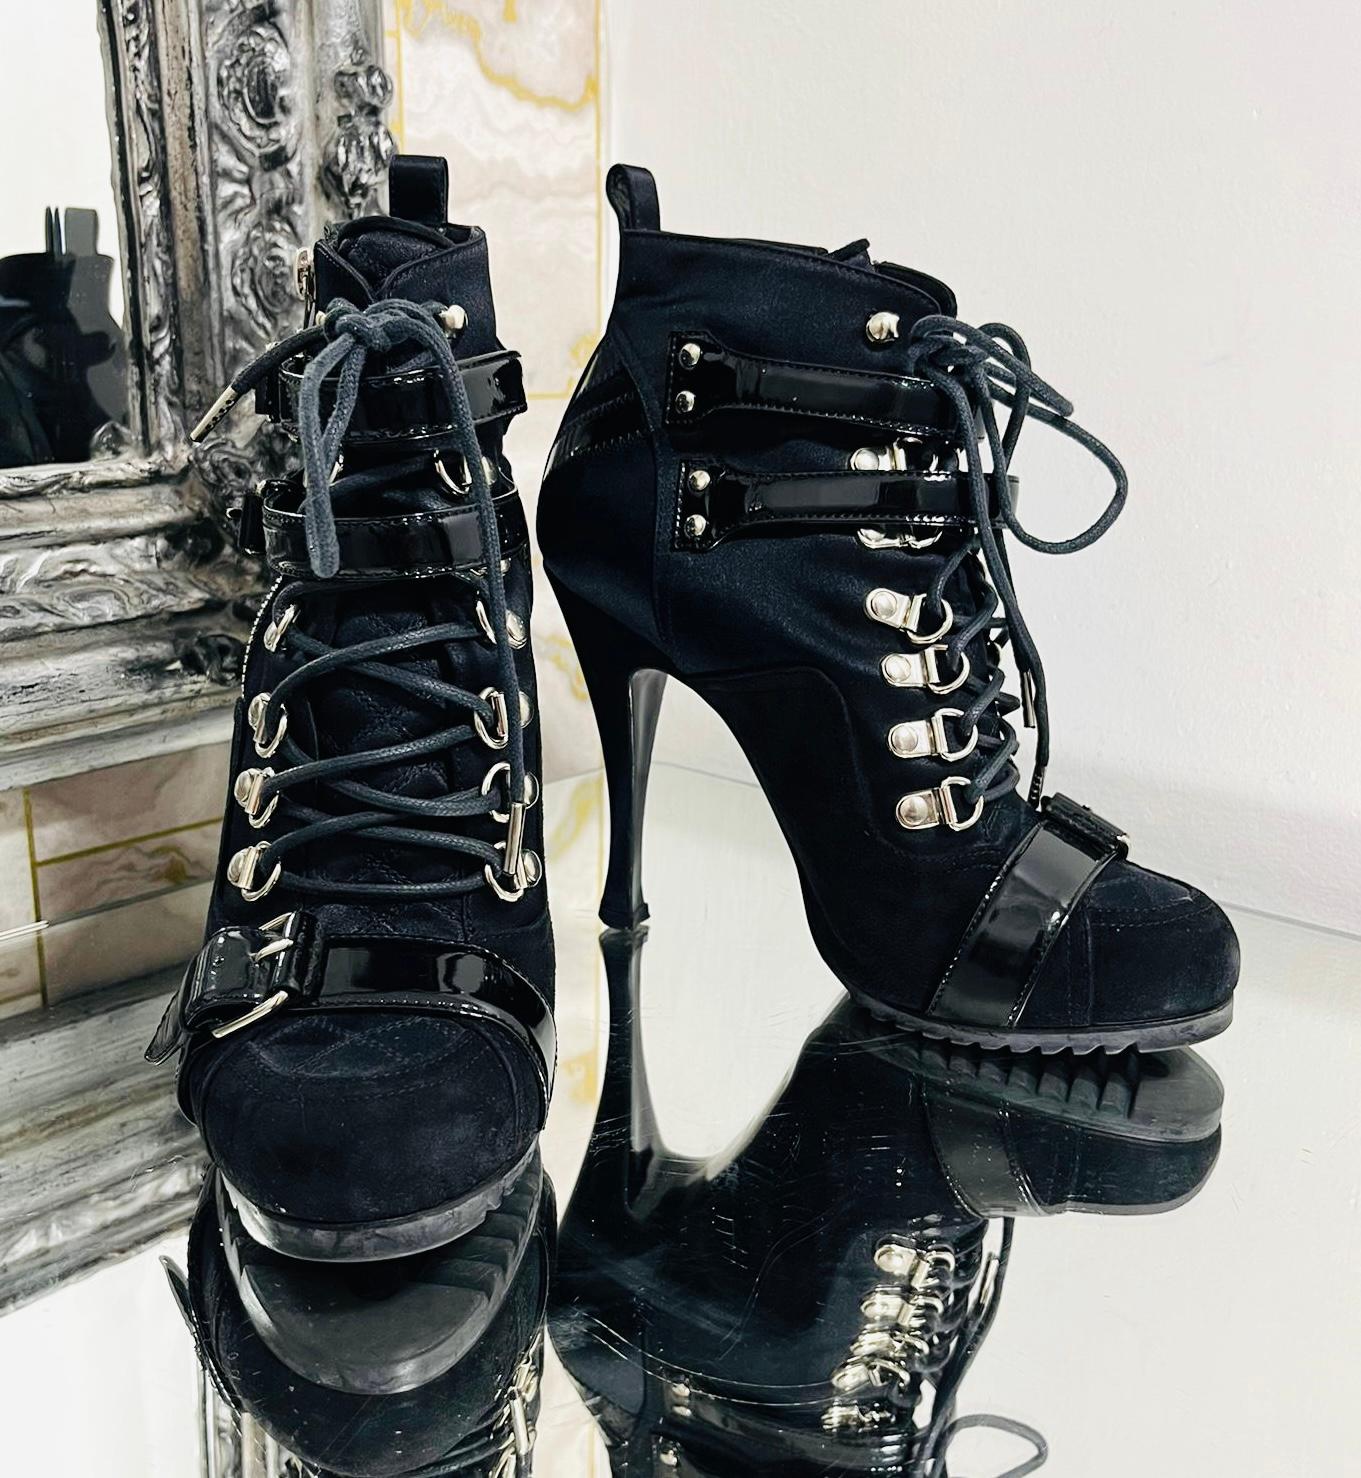 Balenciaga Biker Ankle Shoe/Boots In Excellent Condition For Sale In London, GB